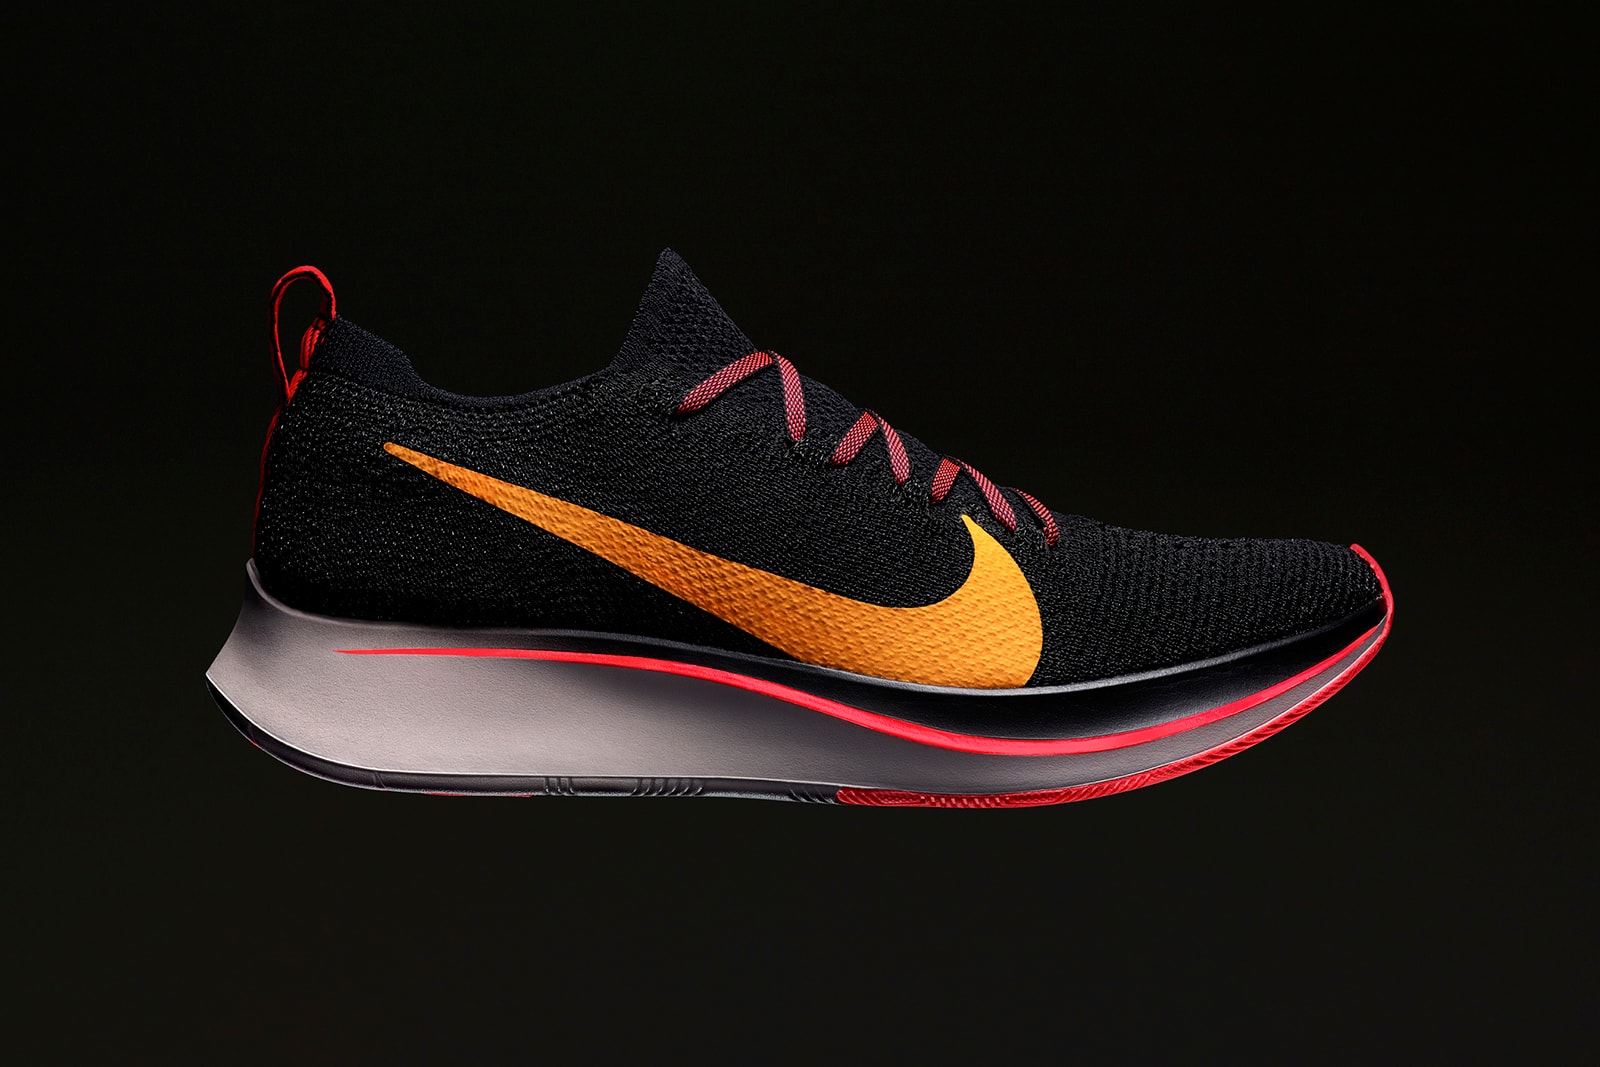 Nike Zoom Vaporfly 4% Flyknit Fly Sneaker Details Shoes Kicks Trainers Sneakers Footwear Cop Purchase Buy $250 USD September 13 October 4 Marathon Running Efficient Lightweight Durable